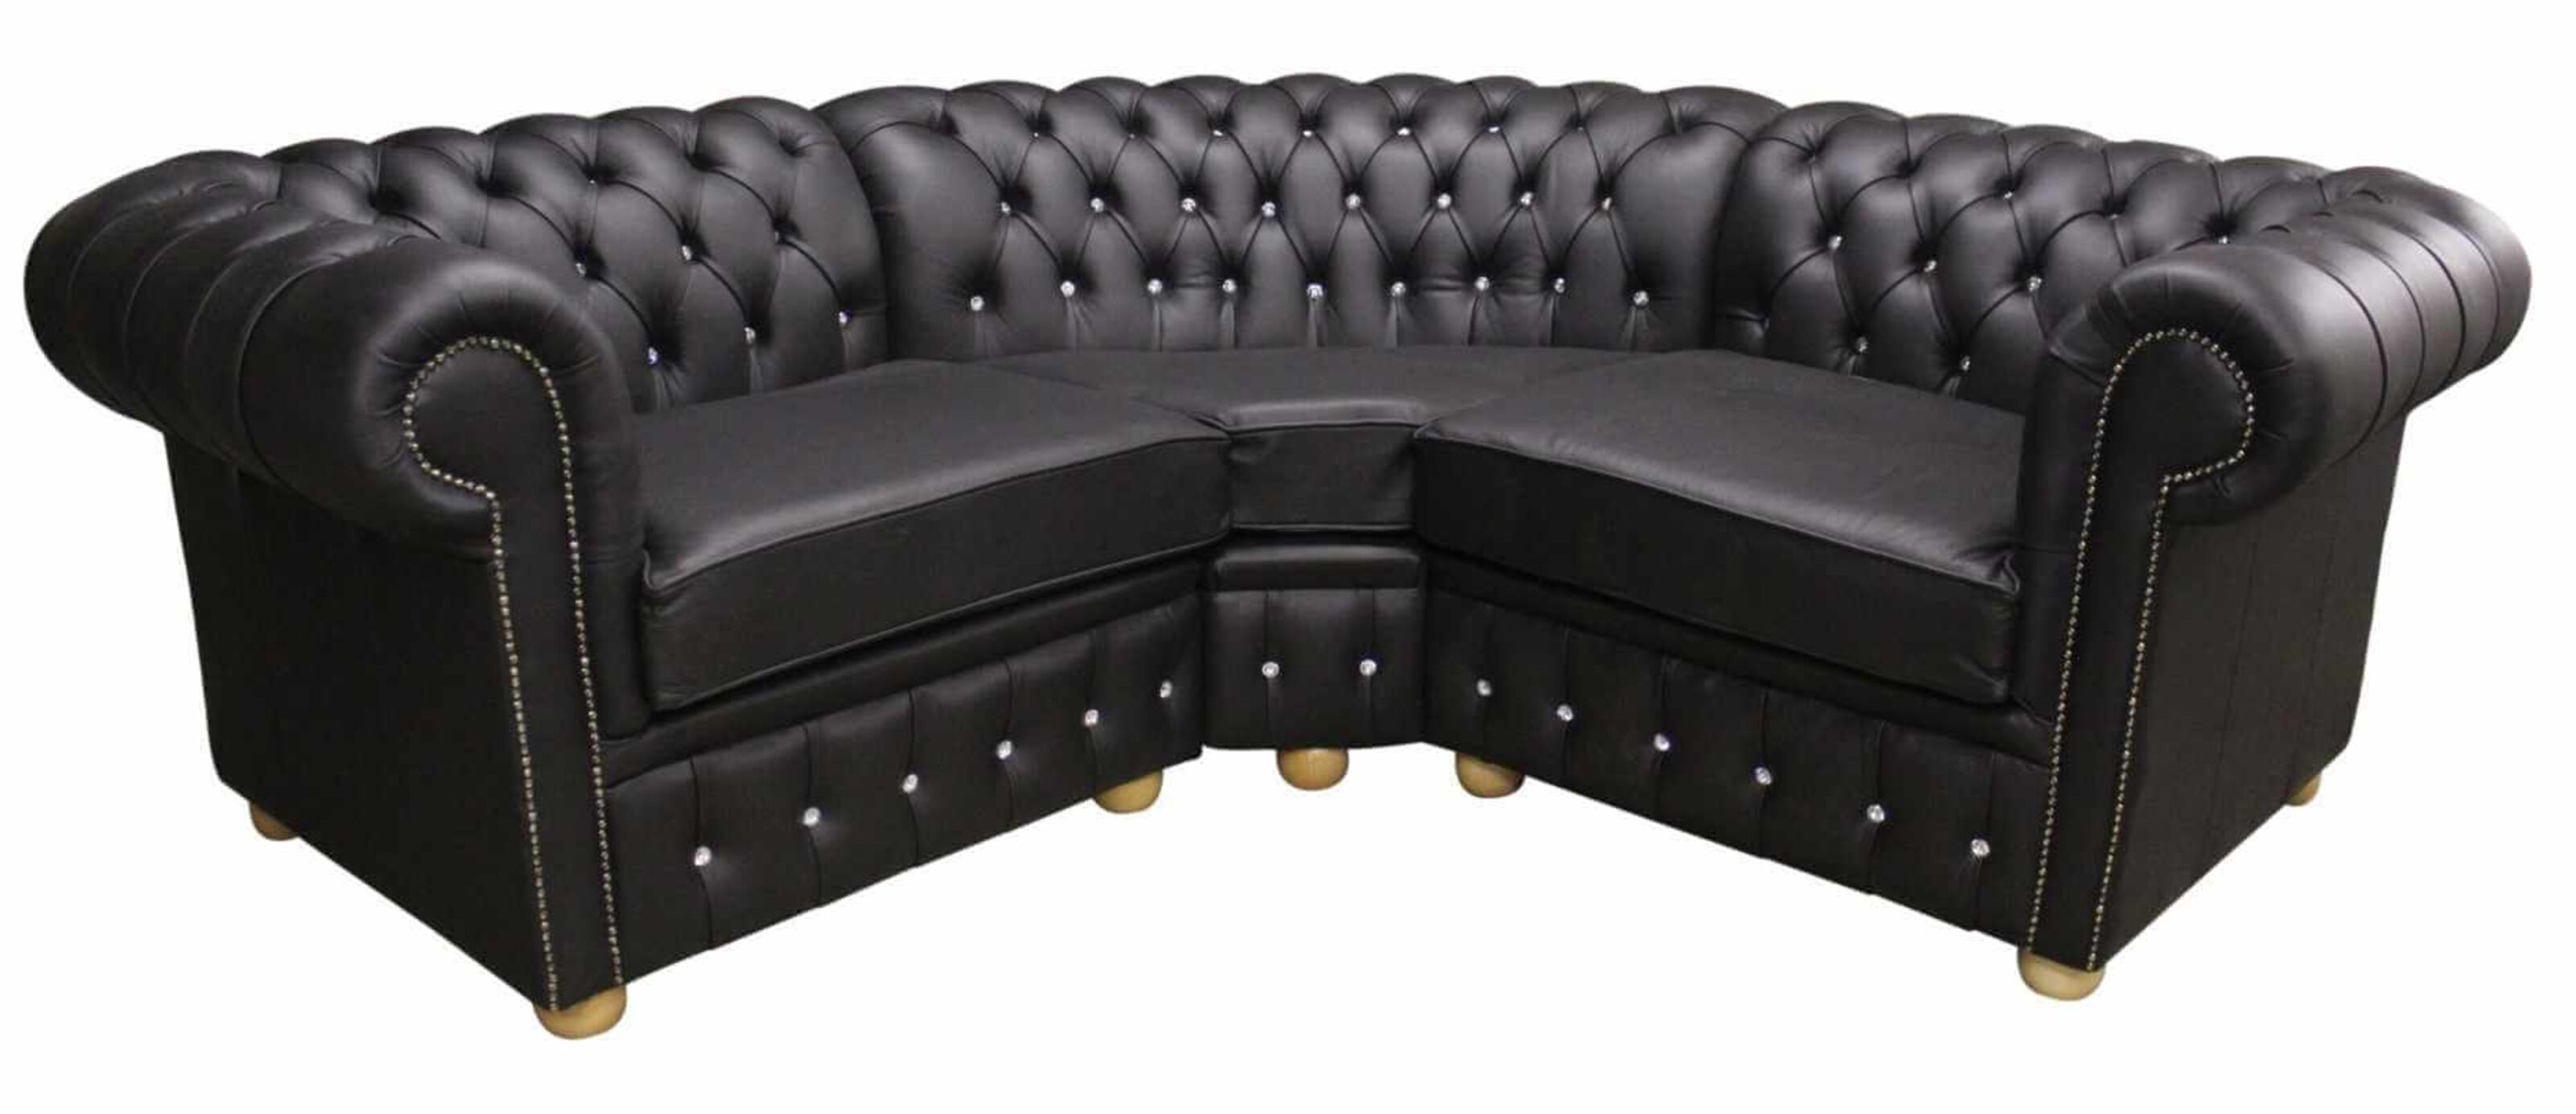 Choosing Between Traditions The Chesterfield versus the Couch  %Post Title